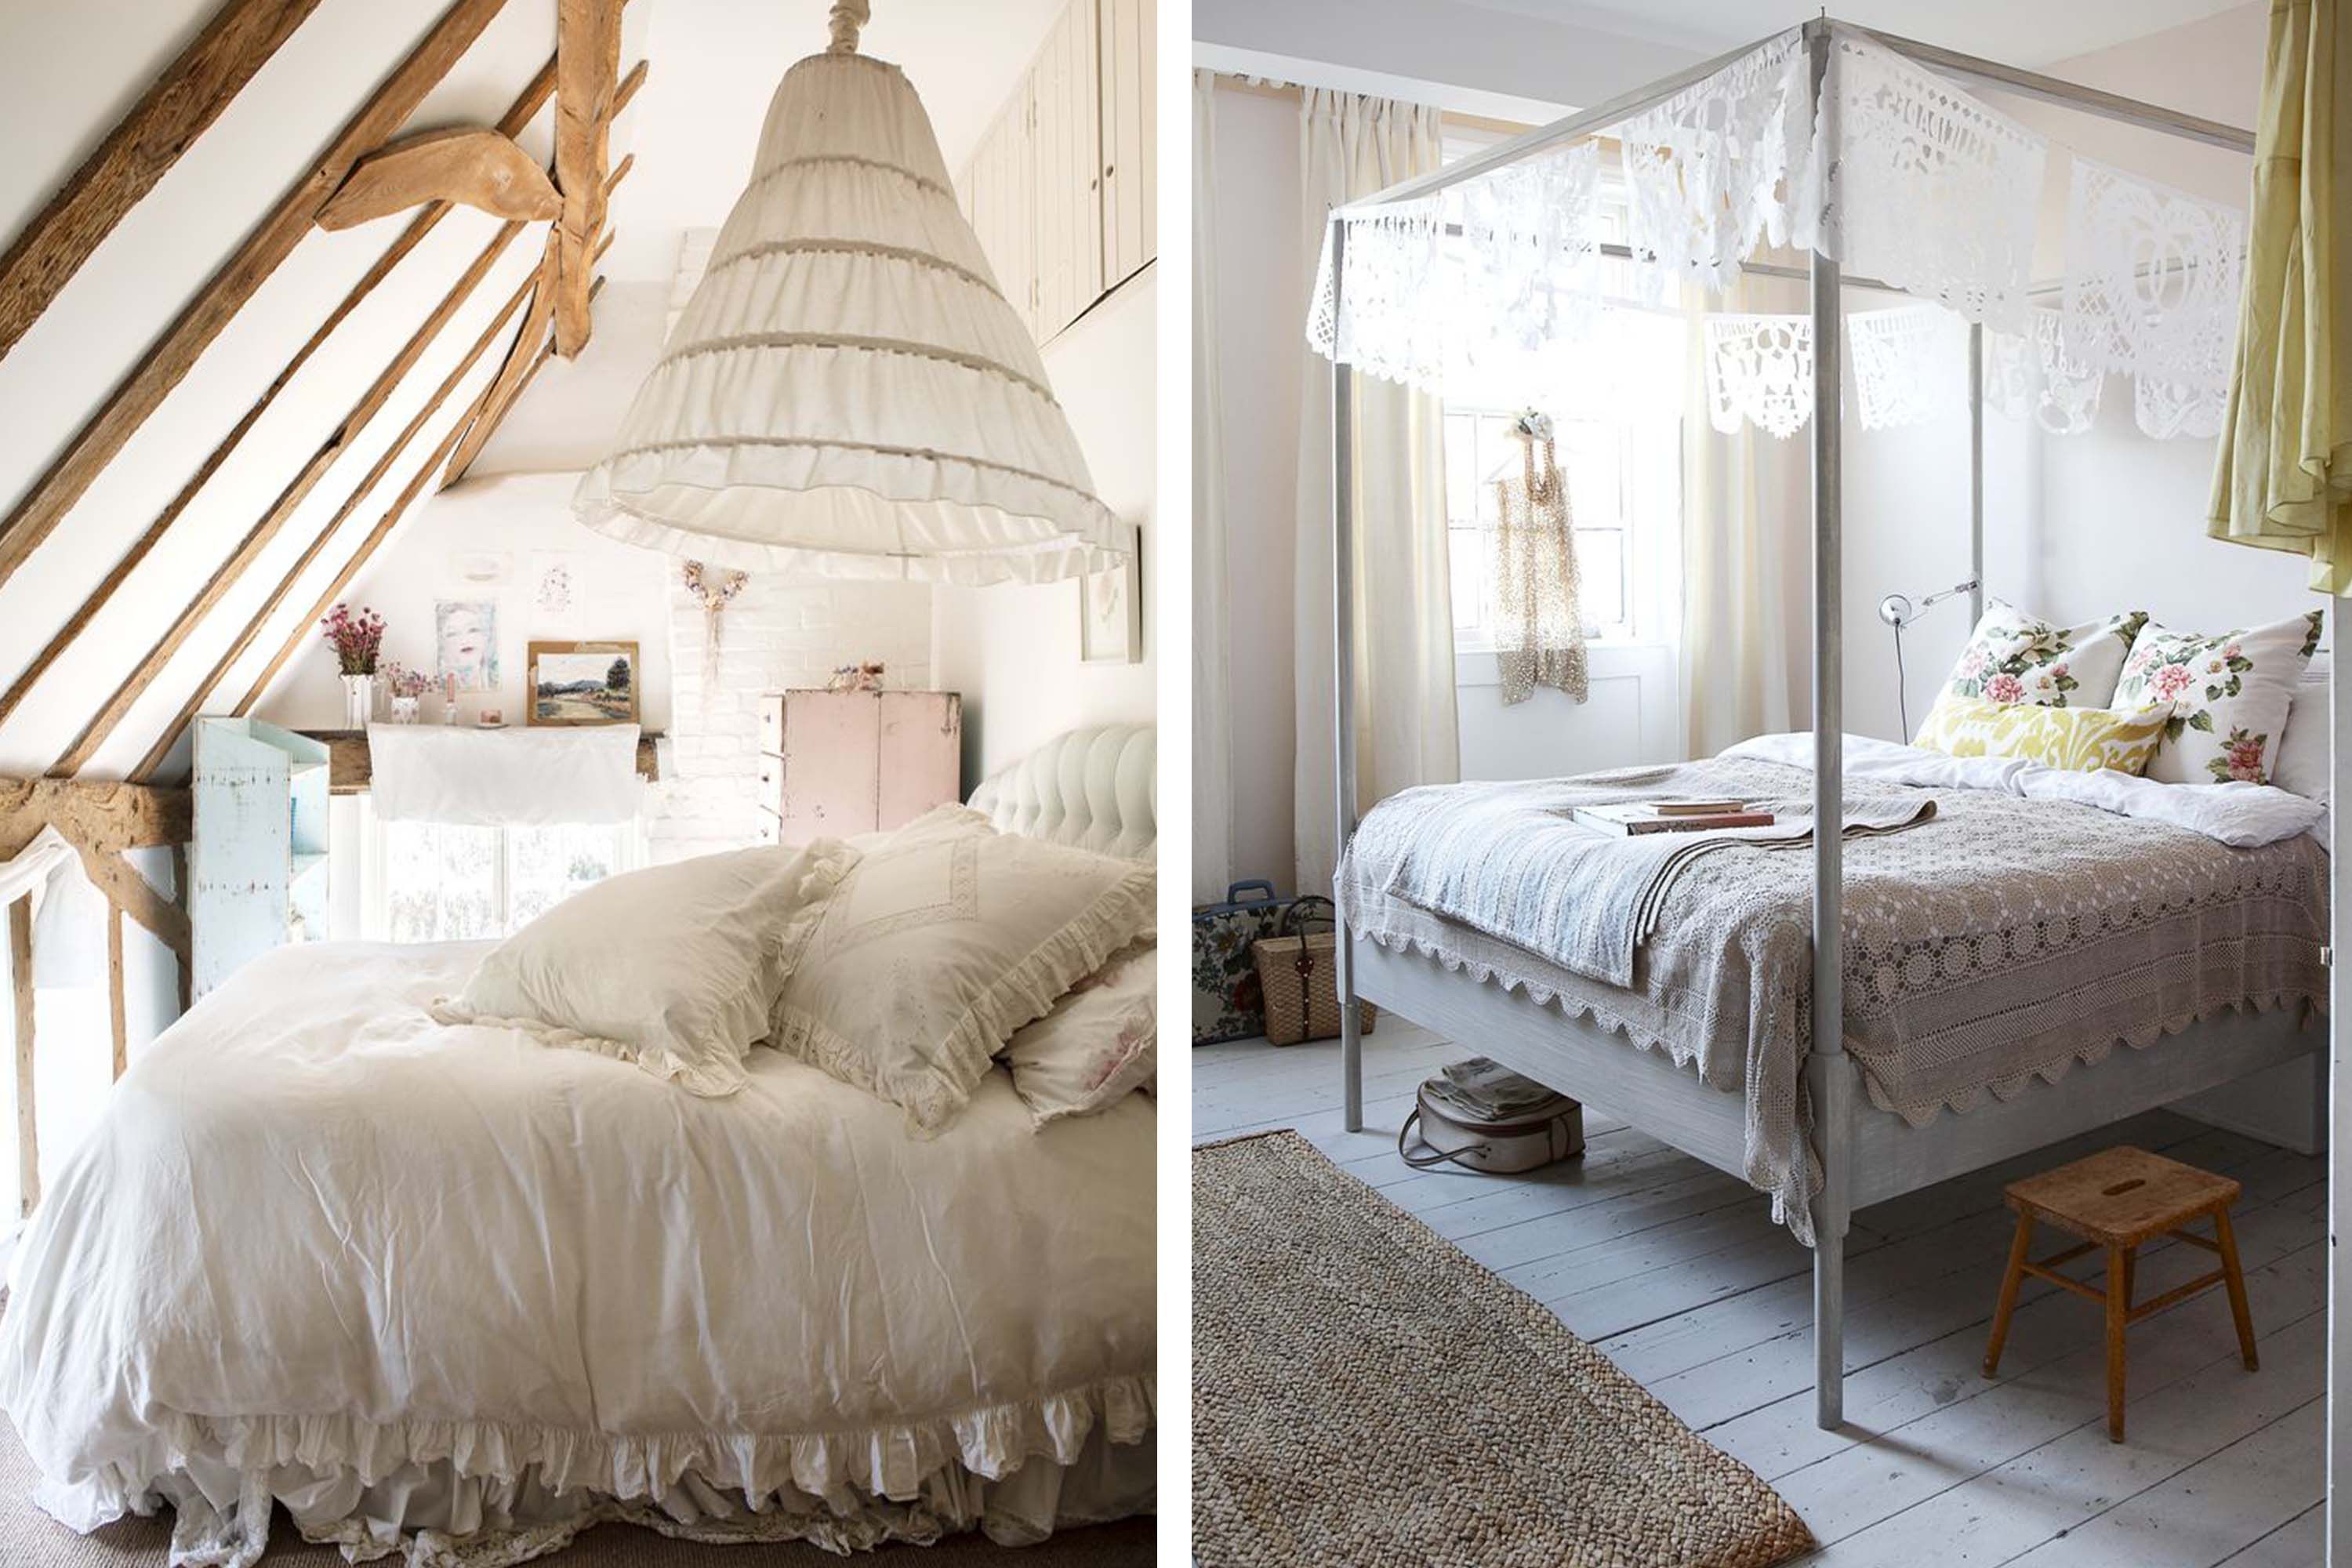 10 Cheap Ways To Transform Your Bedroom For Under £50